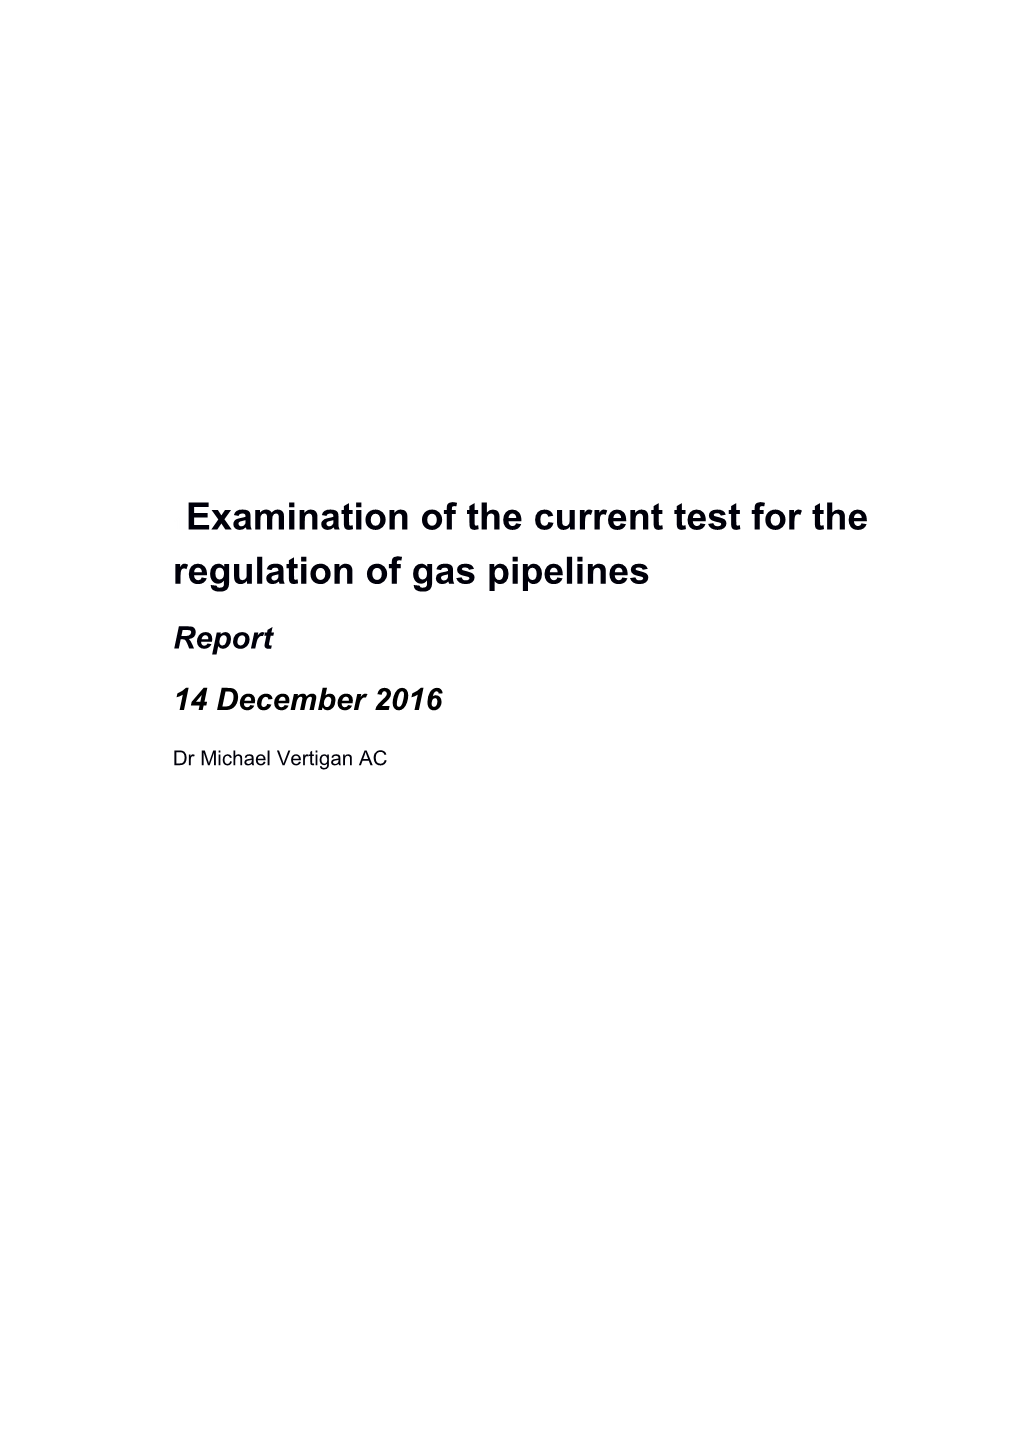 Examination of the Gas Pipeline Coverage Test Final Report